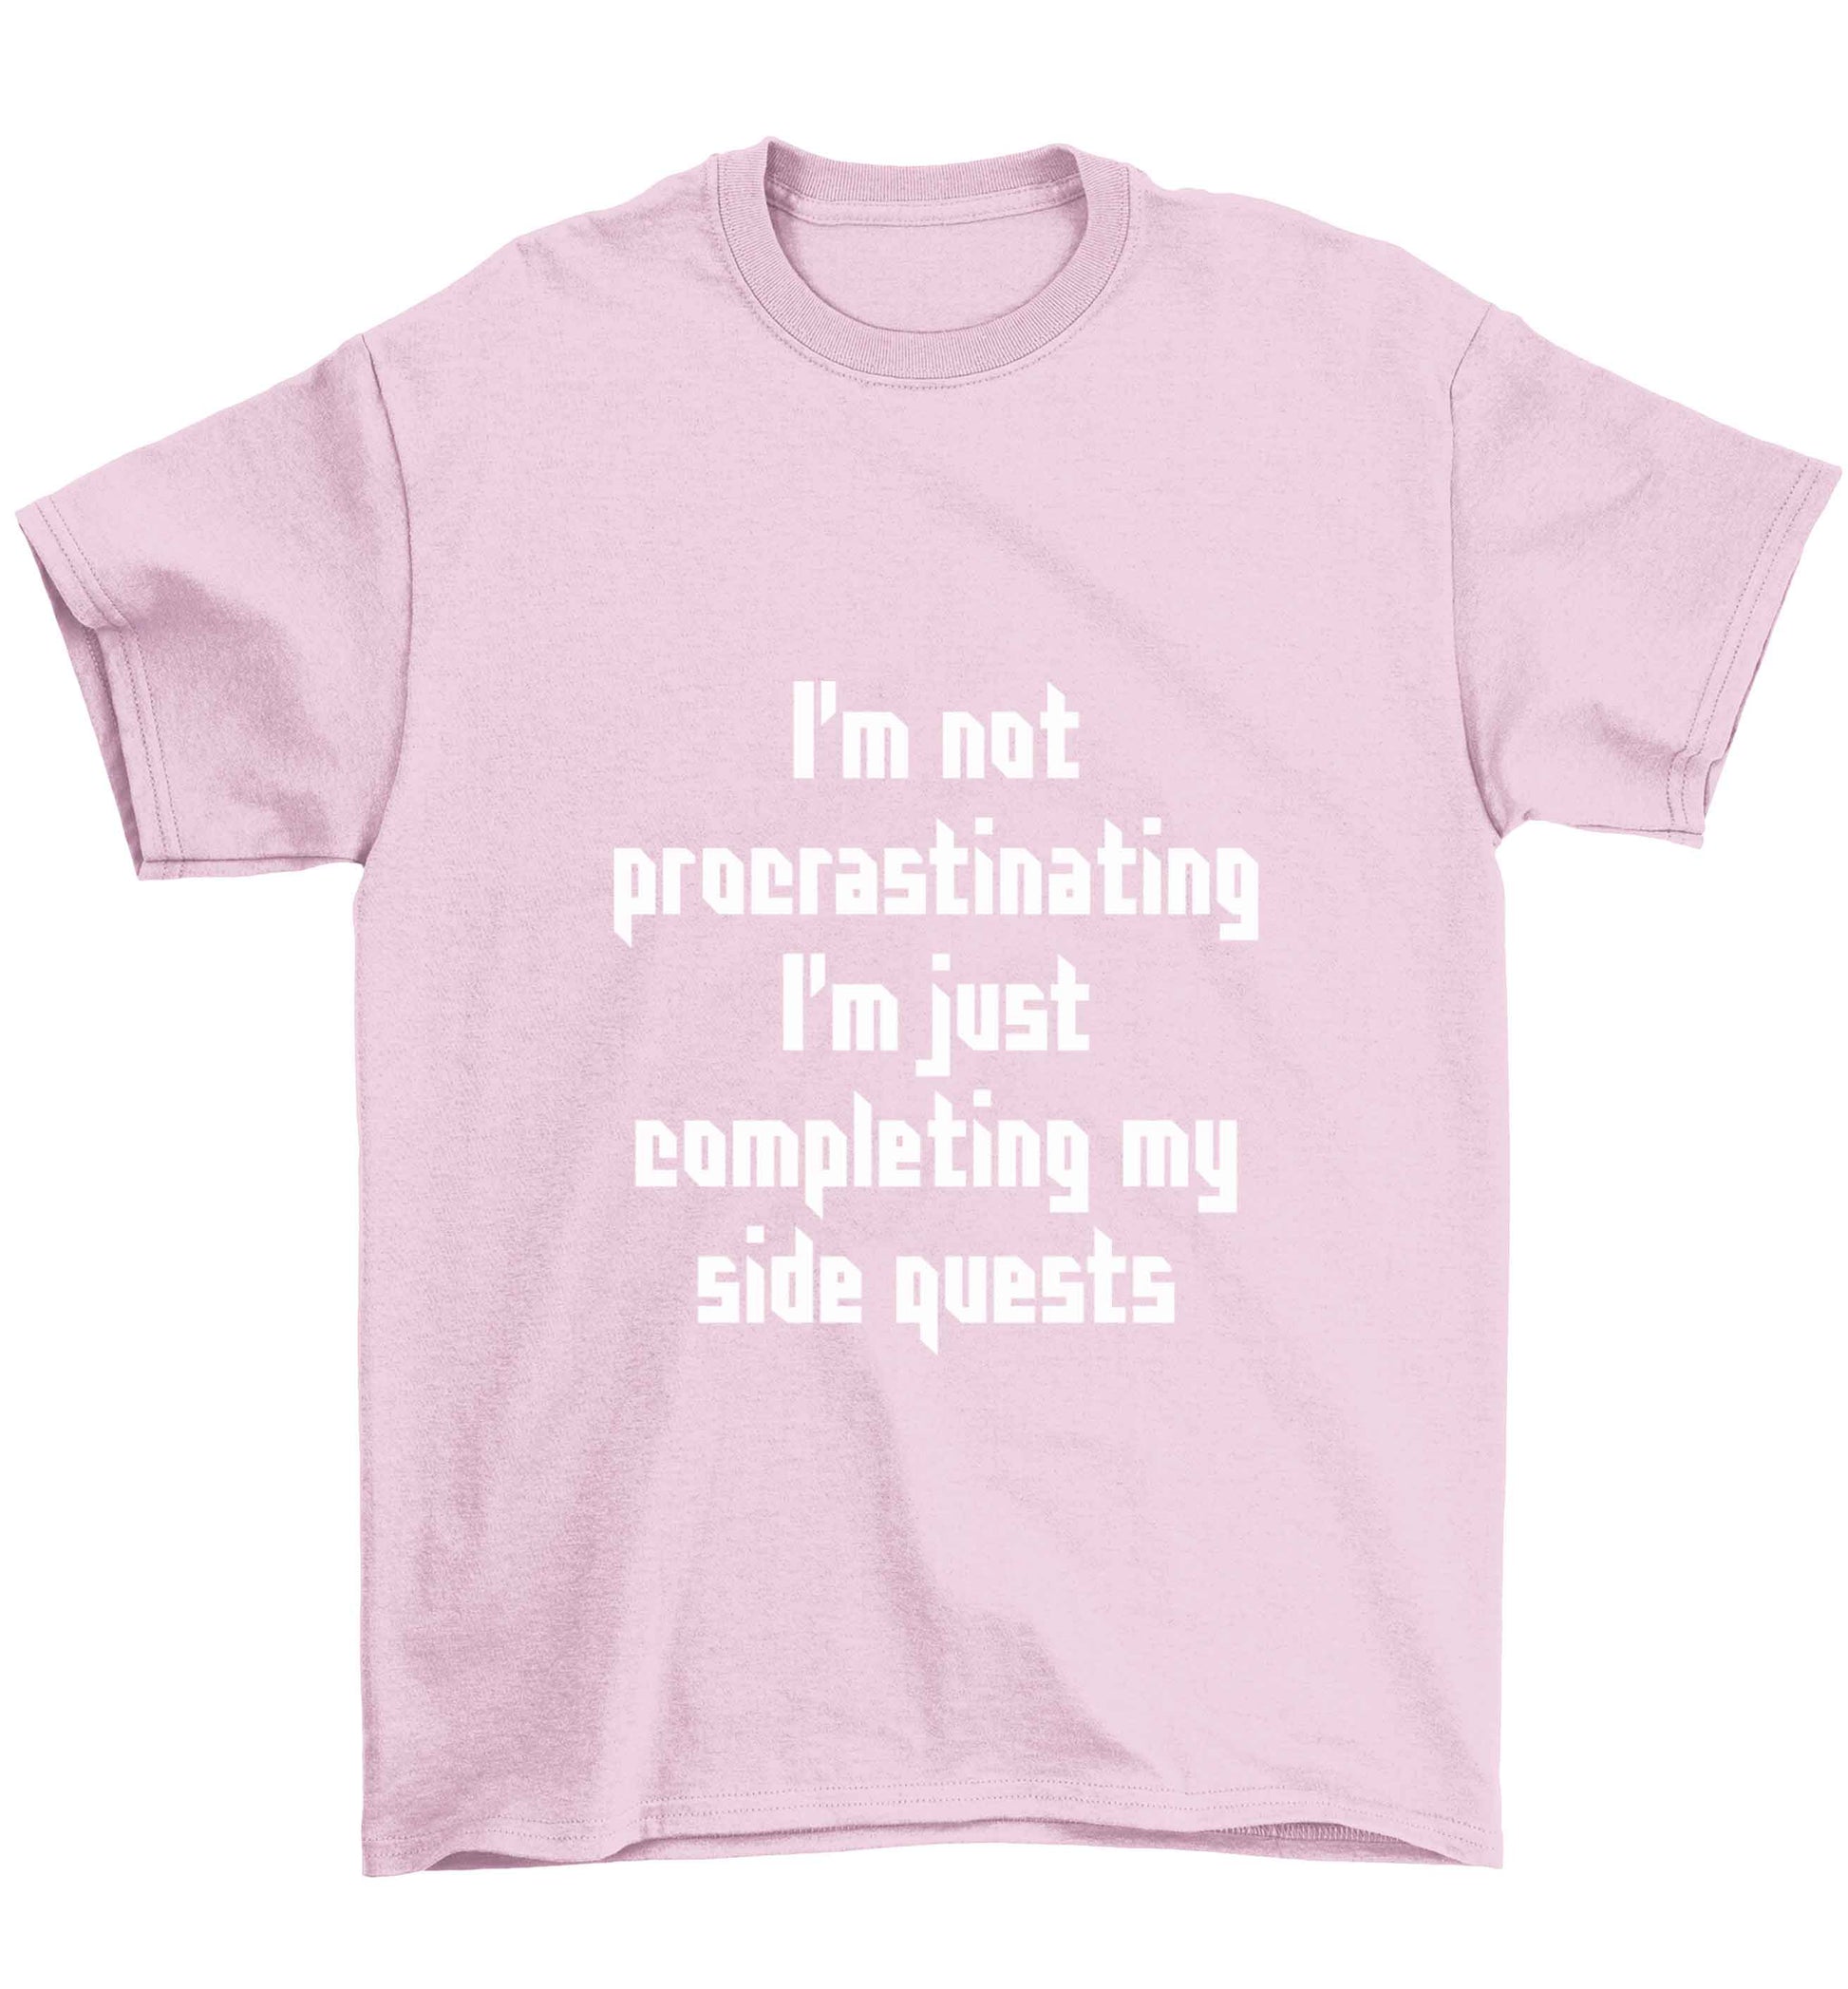 I'm not procrastinating I'm just completing my side quests Children's light pink Tshirt 12-13 Years